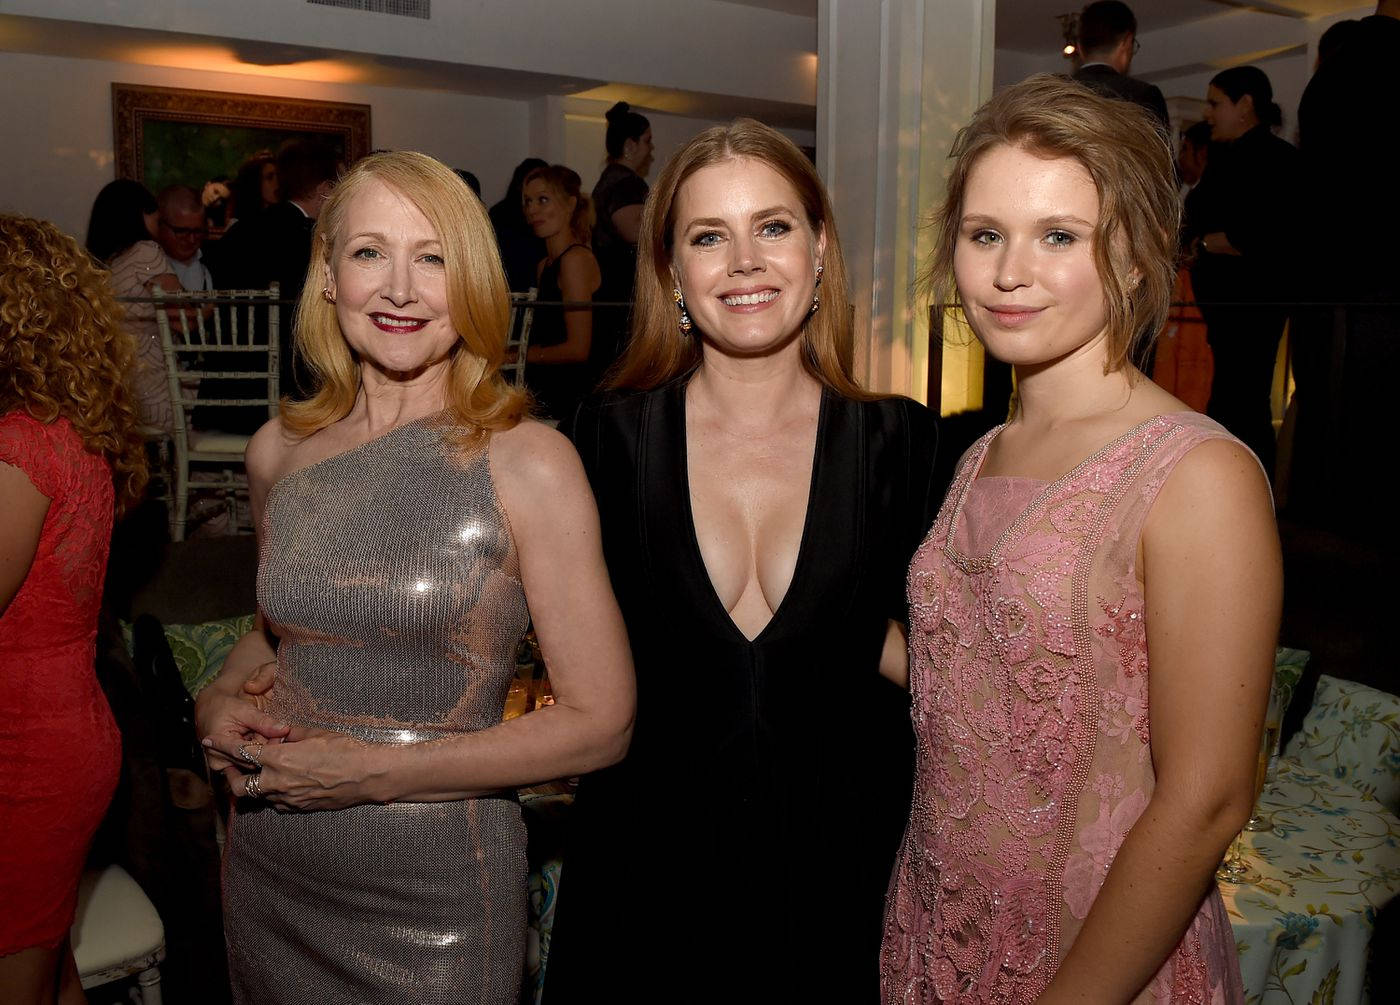 Patricia Clarkson, Amy Adams and Eliza Scanlen making a pose together Wallpaper